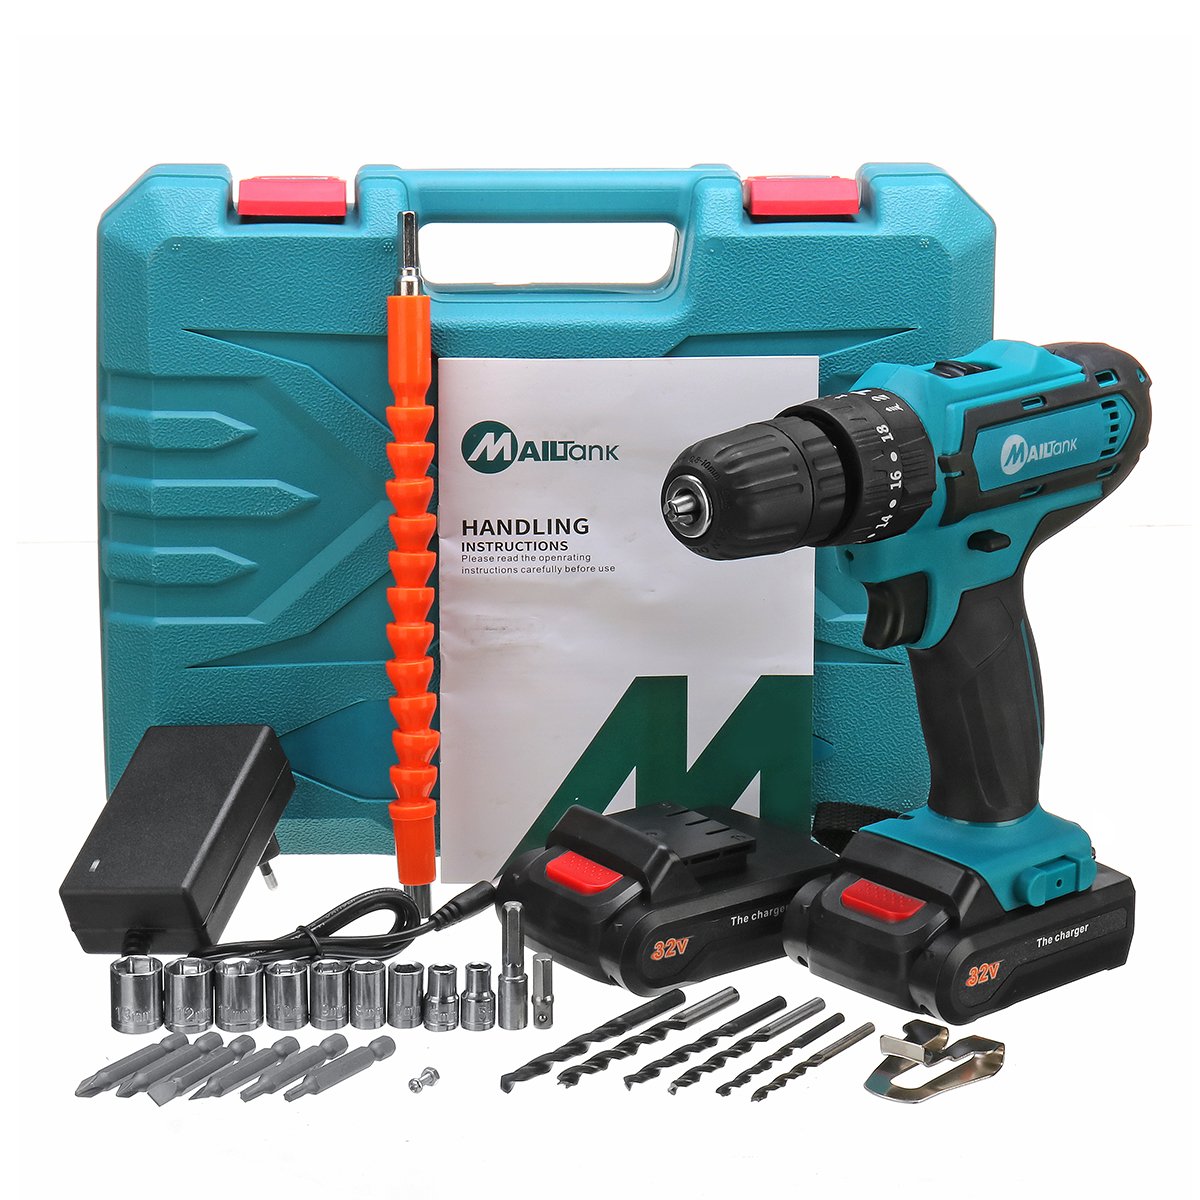 32V 2 Speed Power Drills 6000mah Cordless Drill 3 IN1 Electric Screwdriver Hammer Hand Drill 2 Batteries 1